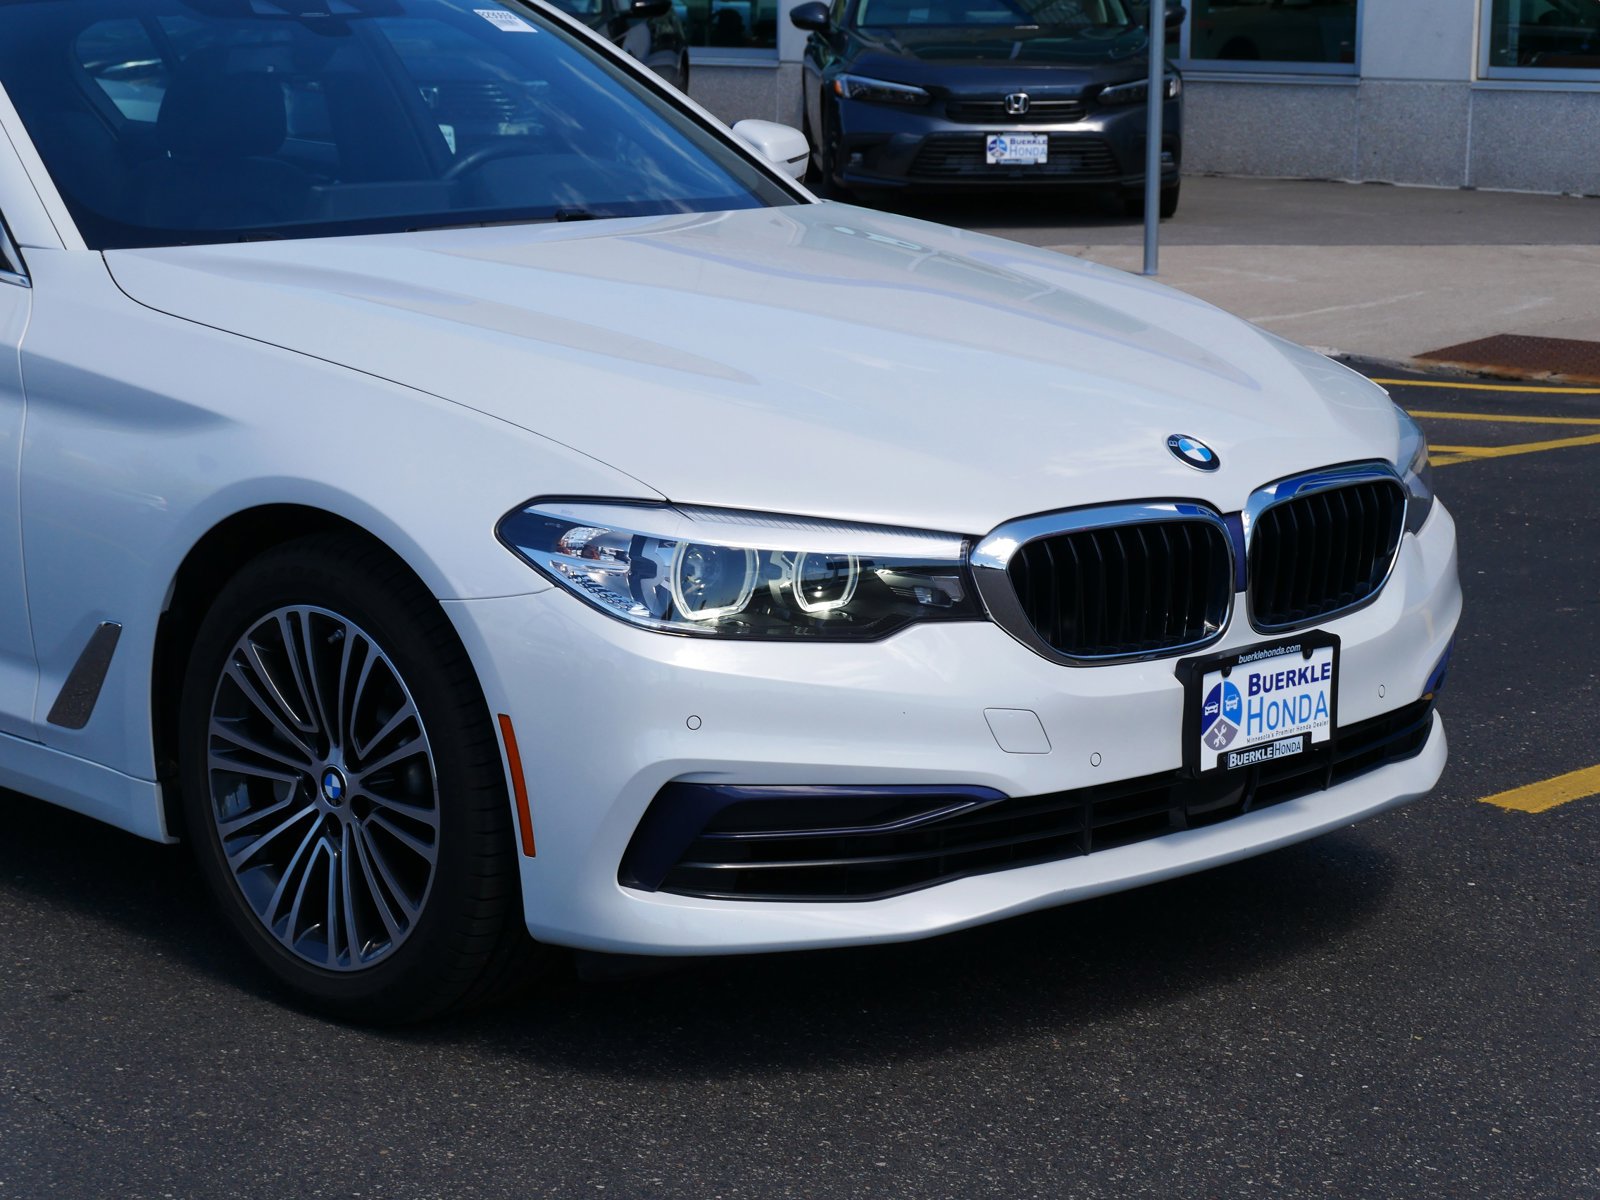 Used 2019 BMW 5 Series 540i with VIN WBAJE7C57KG893233 for sale in Saint Paul, Minnesota